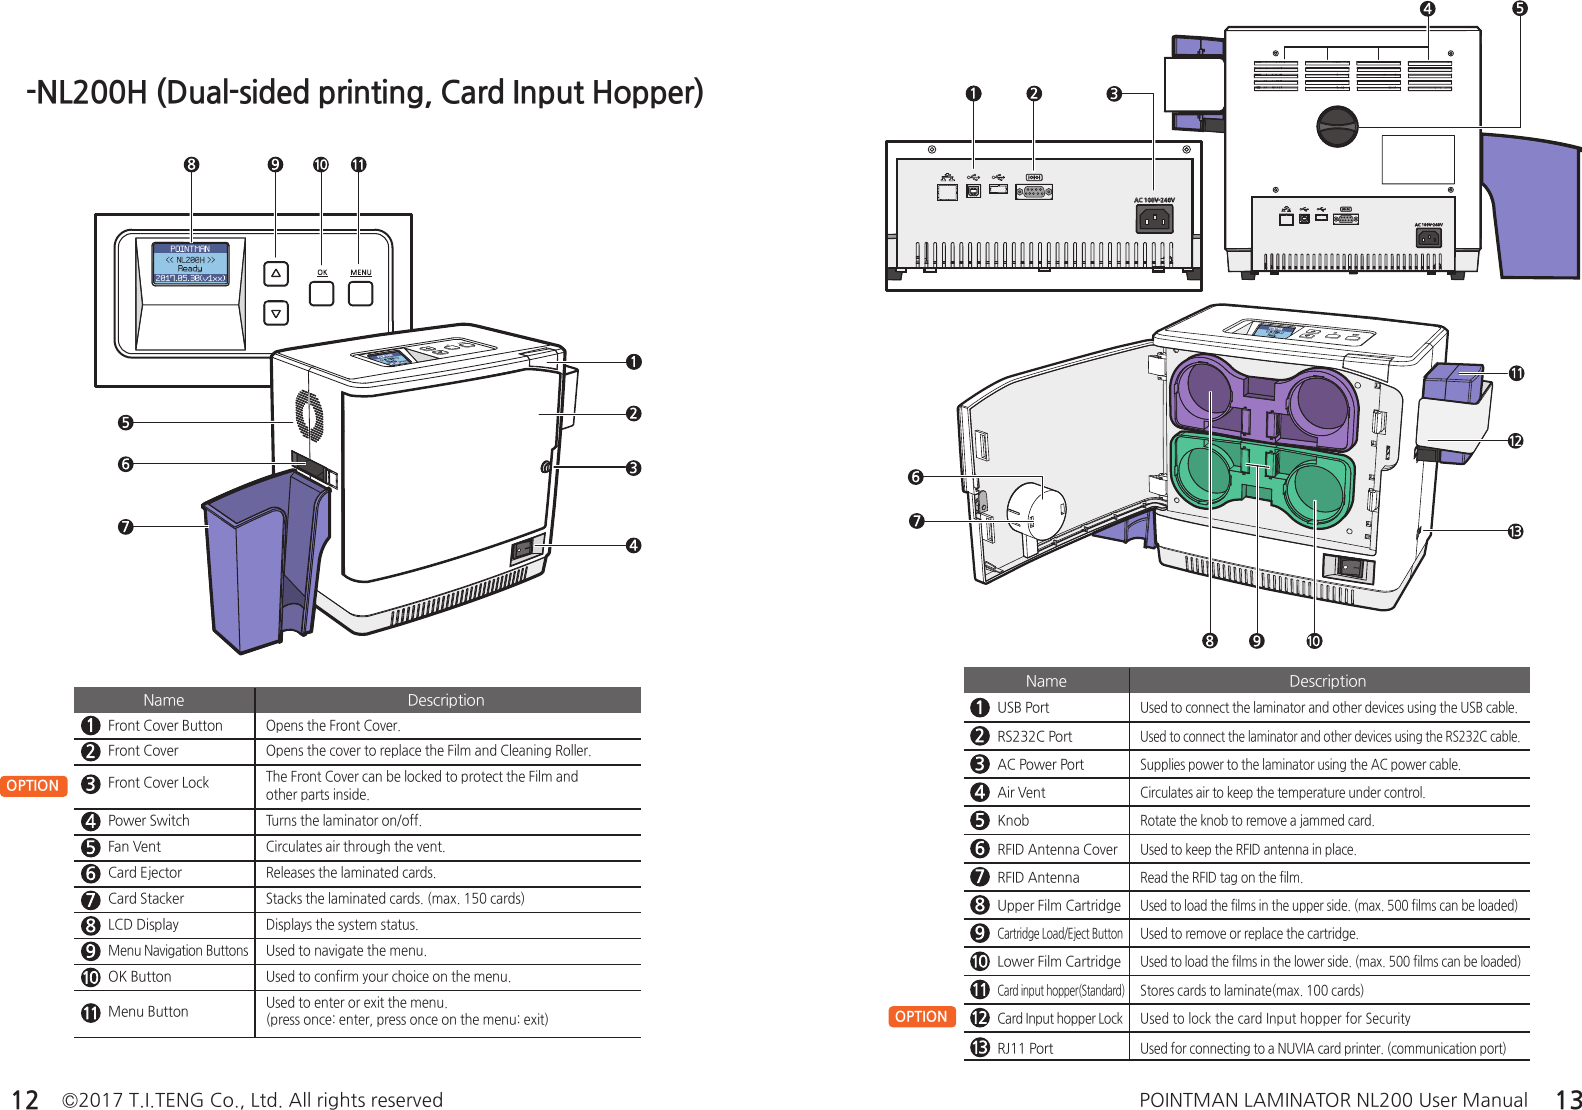 ©2017 T.I.TENG Co., Ltd. All rights reserved POINTMAN LAMINATOR NL200 User Manual12 13-NL200H (Dual-sided printing, Card Input Hopper)RJ11 PortUsed for connecting to a NUVIA card printer. (communication port)OPTION Front Cover ButtonOpens the Front Cover.Front CoverOpens the cover to replace the Film and Cleaning Roller.Front Cover LockThe Front Cover can be locked to protect the Film and other parts inside.Power SwitchTurns the laminator on/off.Fan VentCirculates air through the vent.Card EjectorReleases the laminated cards.Card StackerStacks the laminated cards. (max. 150 cards)LCD DisplayDisplays the system status.Menu Navigation ButtonsUsed to navigate the menu.OK ButtonUsed to confirm your choice on the menu.Menu ButtonUsed to enter or exit the menu. (press once: enter, press once on the menu: exit)Name DescriptionUSB PortUsed to connect the laminator and other devices using the USB cable.RS232C PortUsed to connect the laminator and other devices using the RS232C cable.AC Power PortSupplies power to the laminator using the AC power cable.Air VentCirculates air to keep the temperature under control.KnobRotate the knob to remove a jammed card.RFID Antenna CoverUsed to keep the RFID antenna in place.RFID AntennaRead the RFID tag on the film.Upper Film CartridgeUsed to load the films in the upper side. (max. 500 films can be loaded)Cartridge Load/Eject ButtonUsed to remove or replace the cartridge.Lower Film CartridgeUsed to load the films in the lower side. (max. 500 films can be loaded)Card input hopper(Standard)Stores cards to laminate(max. 100 cards)Card Input hopper Lock Used to lock the card Input hopper for SecurityName DescriptionOPTION 